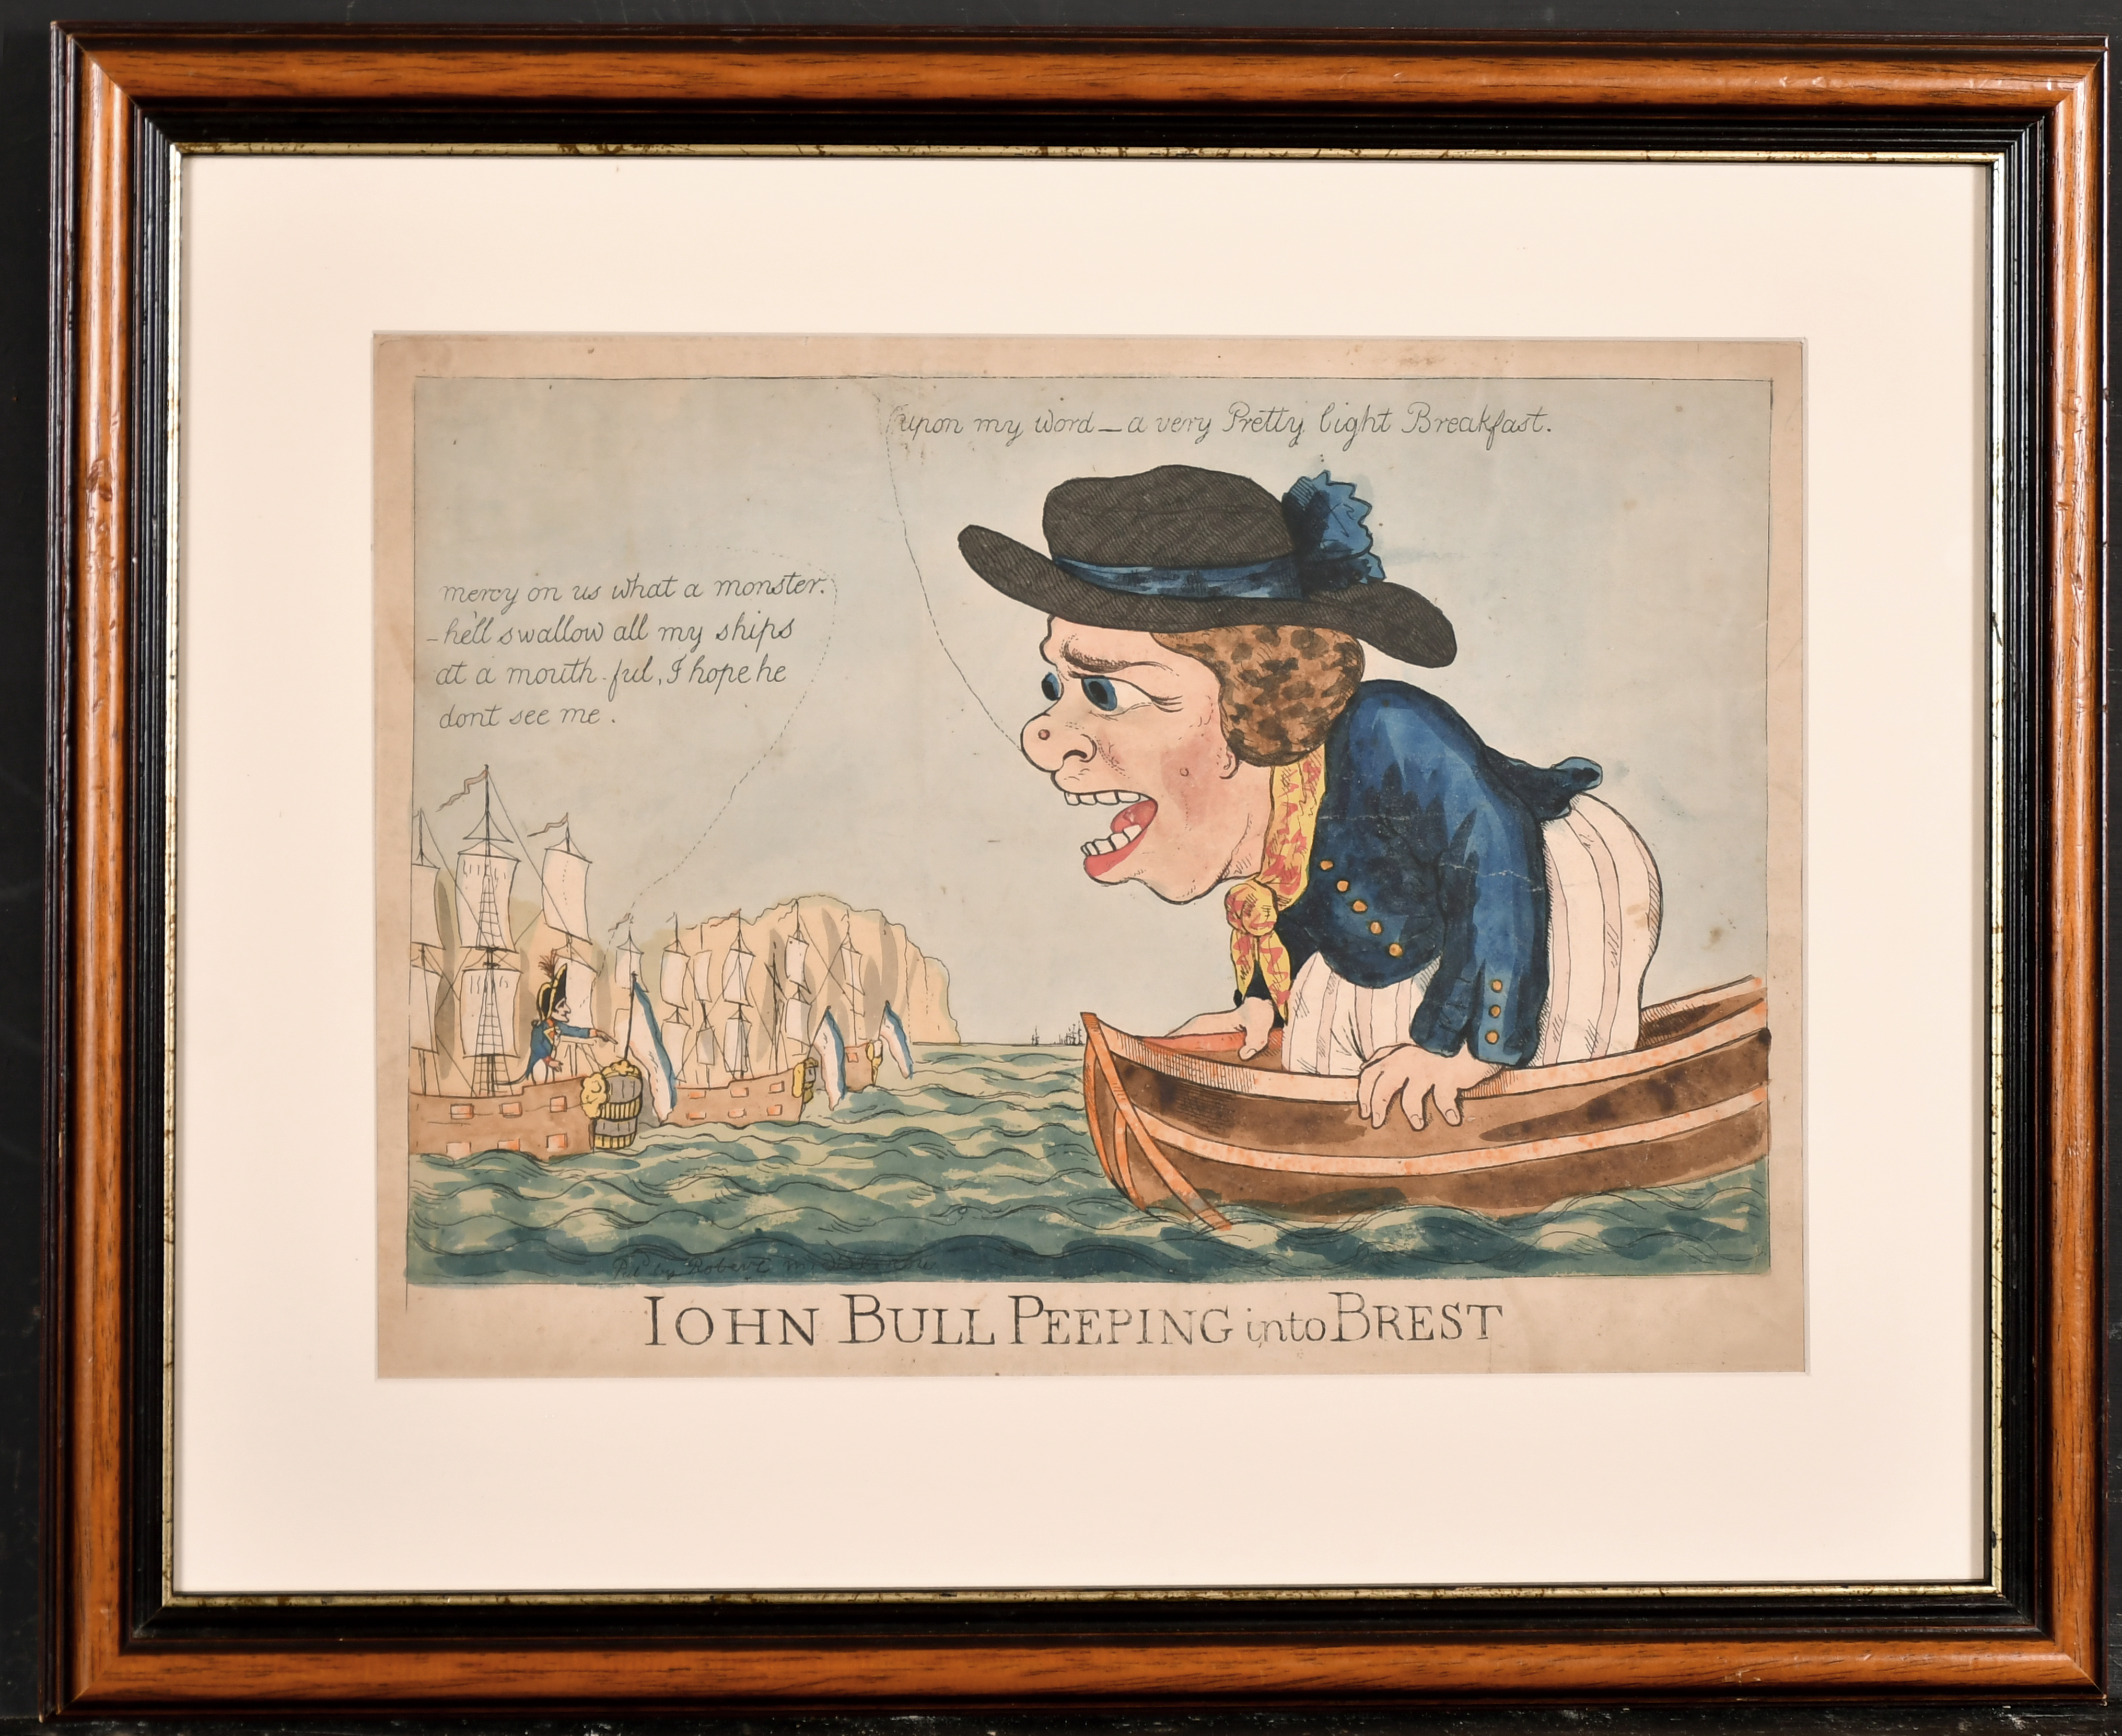 George Moutard Woodward (1760-1809) British. "John Bull Peeping into Brest", Hand Coloured - Image 2 of 7